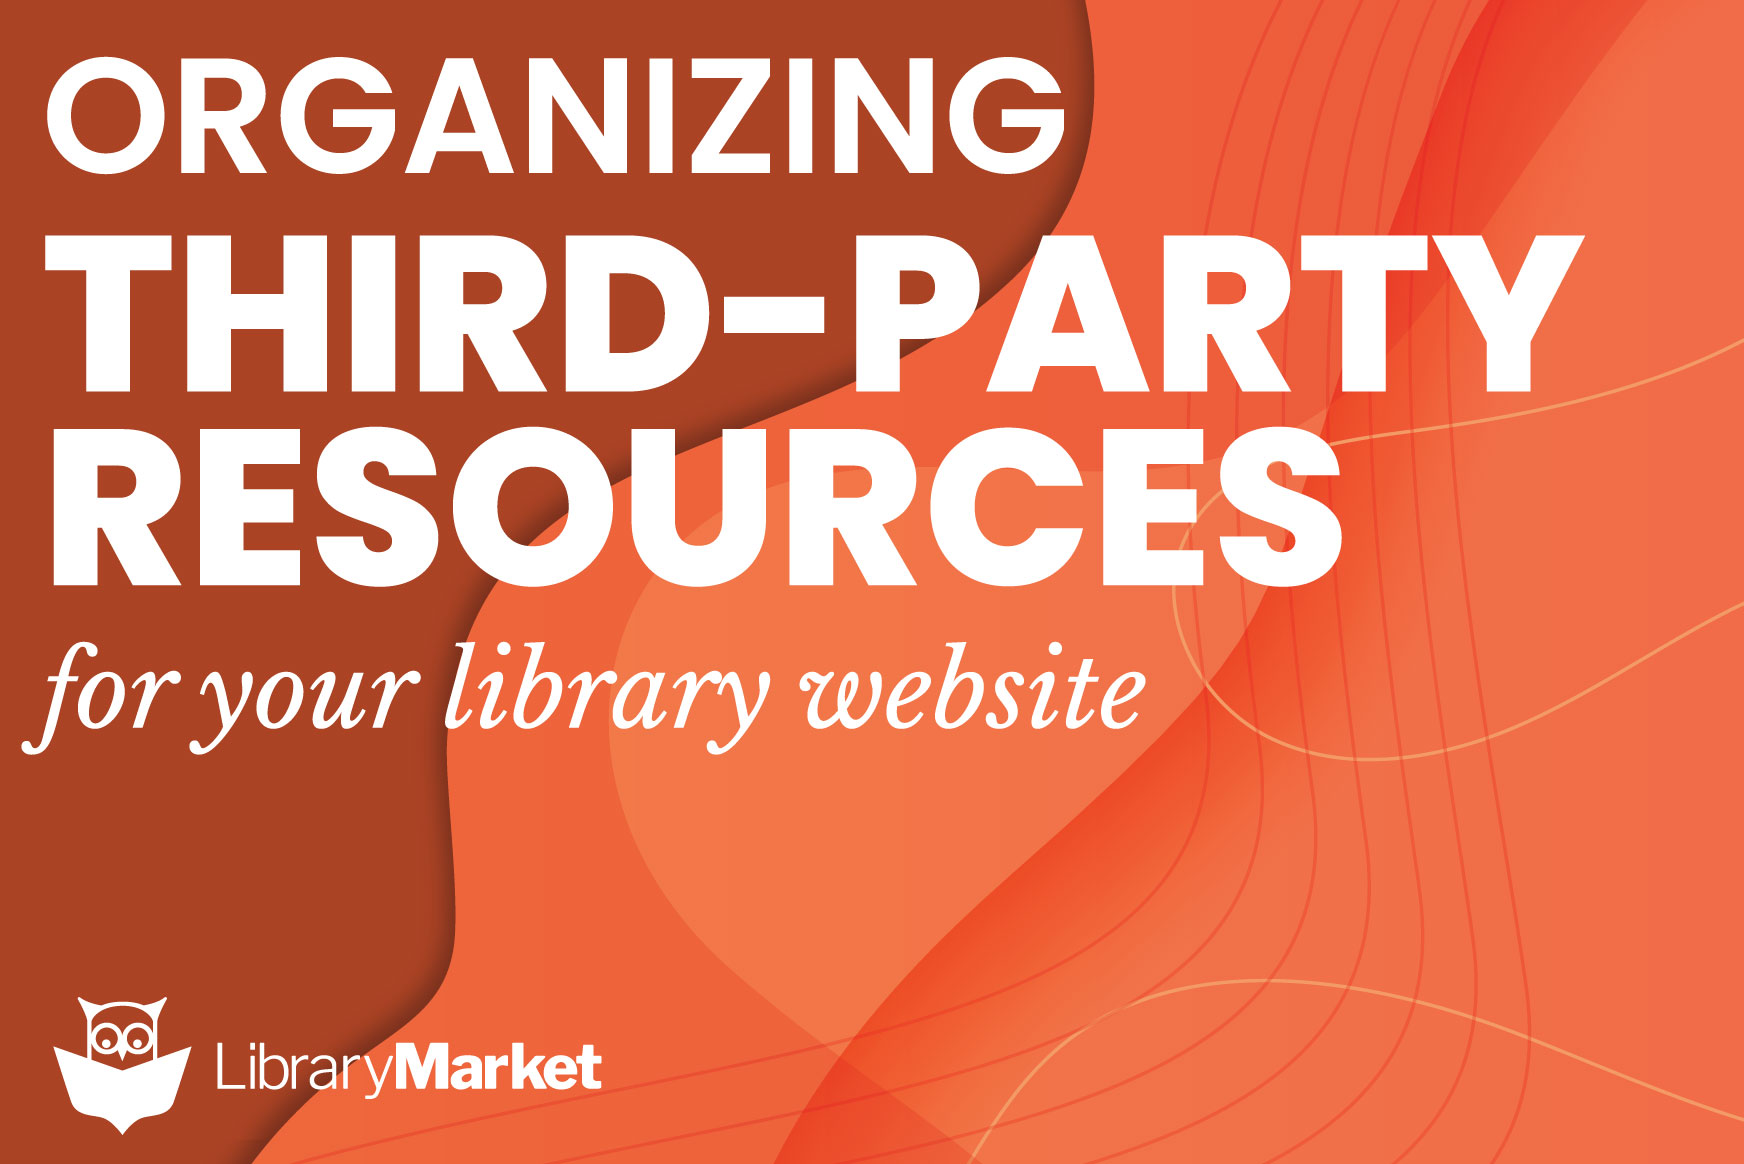 Organizing Your 3rd-Party Resources for Research, Online Learning, and Download/Stream on Your Library Website